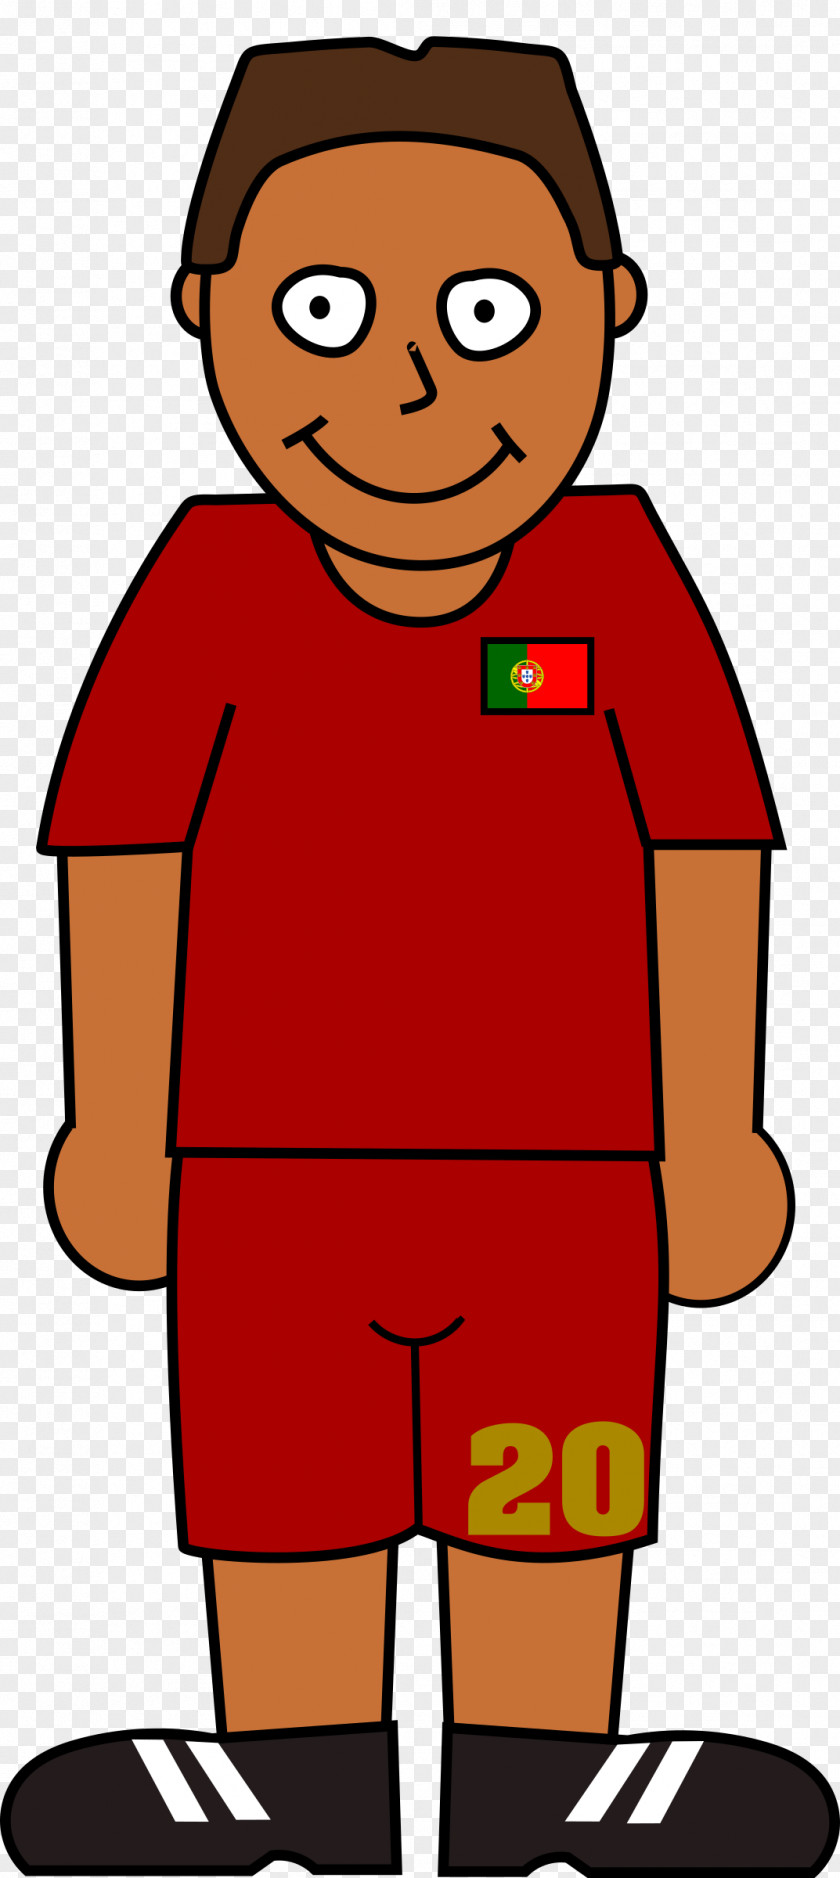 Football 2018 World Cup Portugal National Team Colombia Player Clip Art PNG